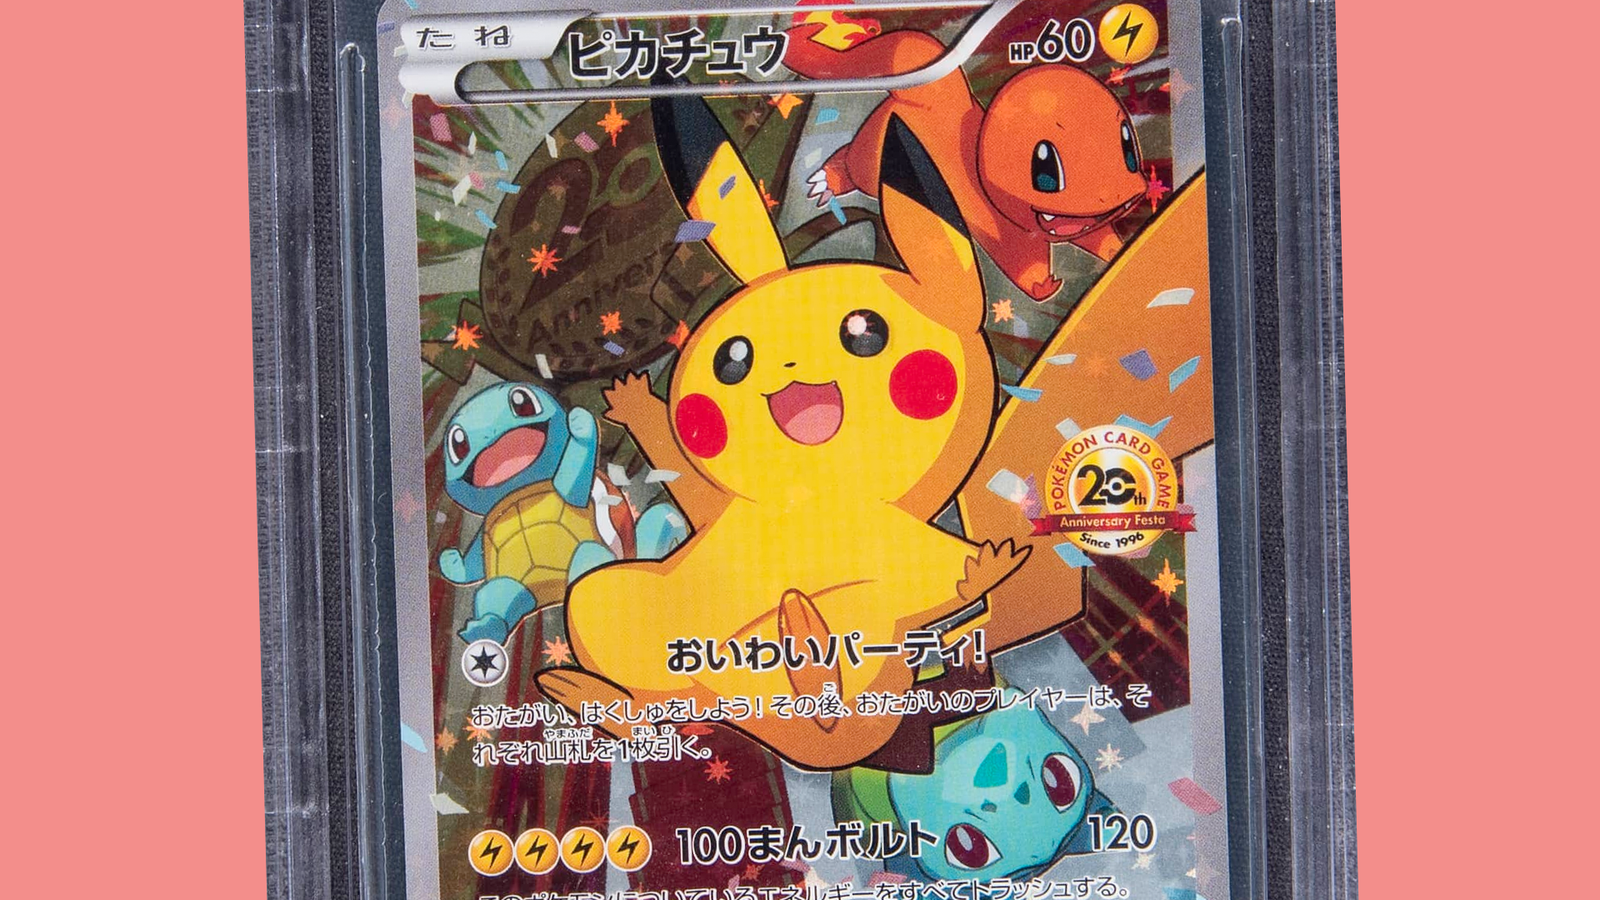 https://assetsio.reedpopcdn.com/pokemon-card-xy-p-promo-20th-anniversary-pikachu.png?width=1600&height=900&fit=crop&quality=100&format=png&enable=upscale&auto=webp